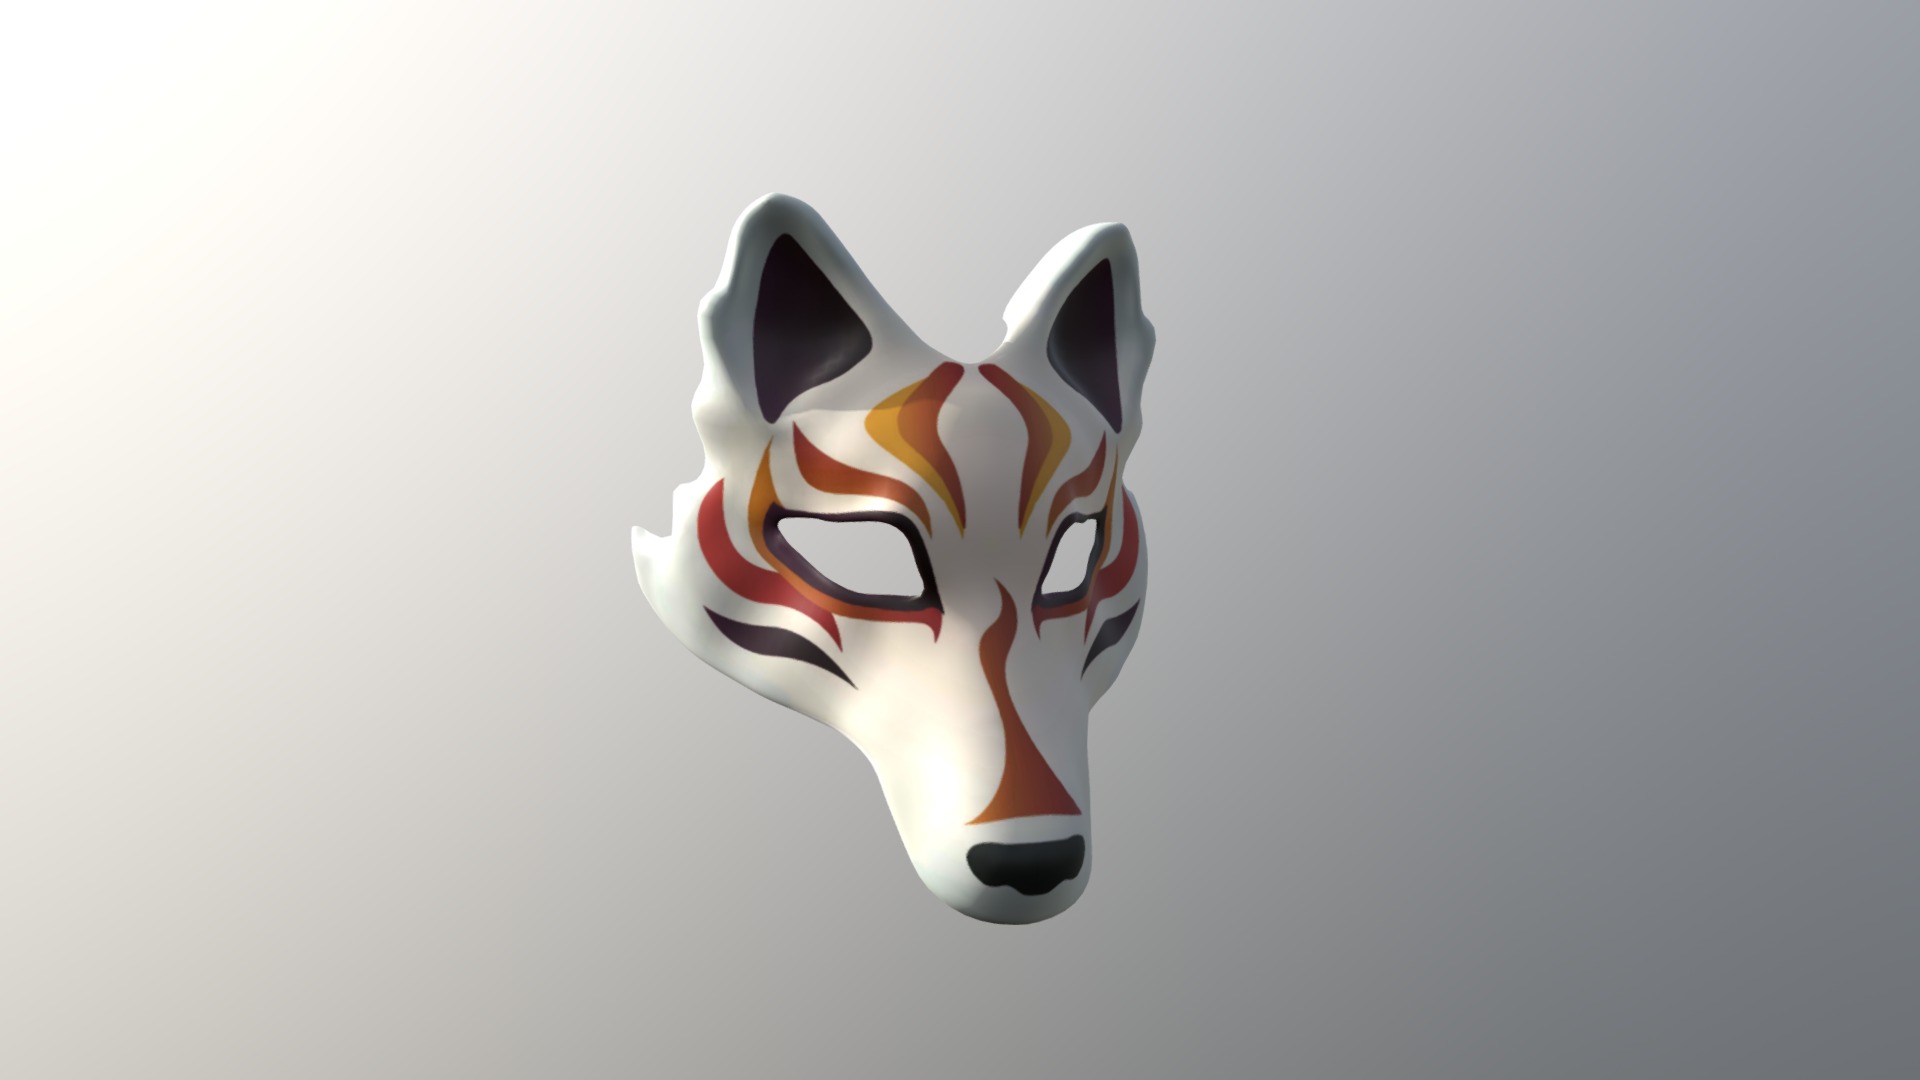 3D model Japanese Fox - This is a 3D model of the Japanese Fox. The 3D model is about a red and white fox head.